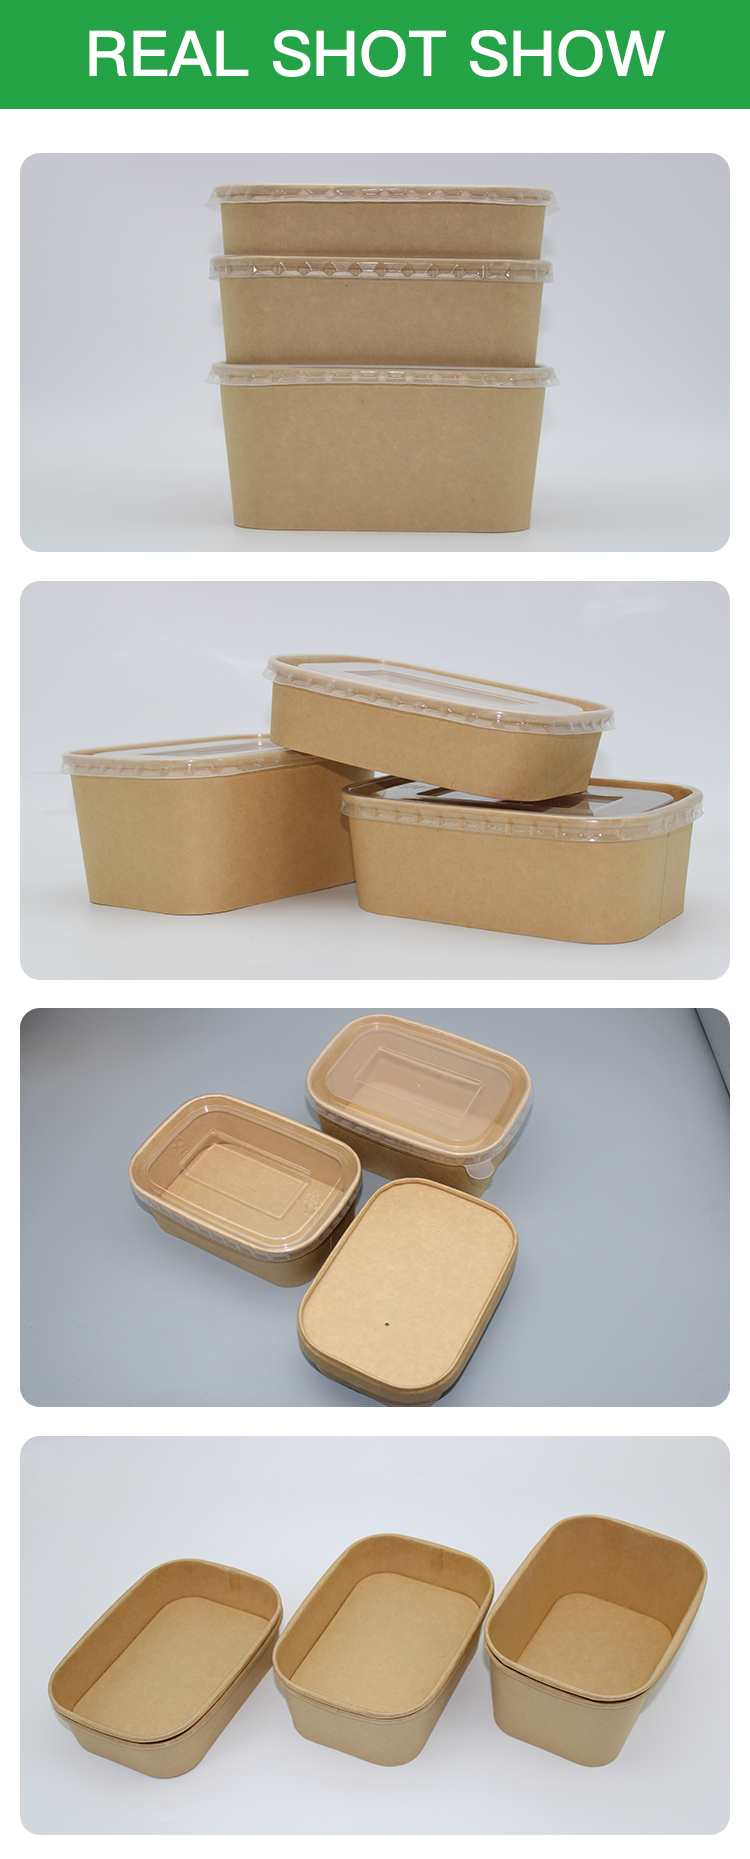 500 650 750 1000ml Food Packaging Containers Square Biodegradable Food Bowl takeout box take away bowl